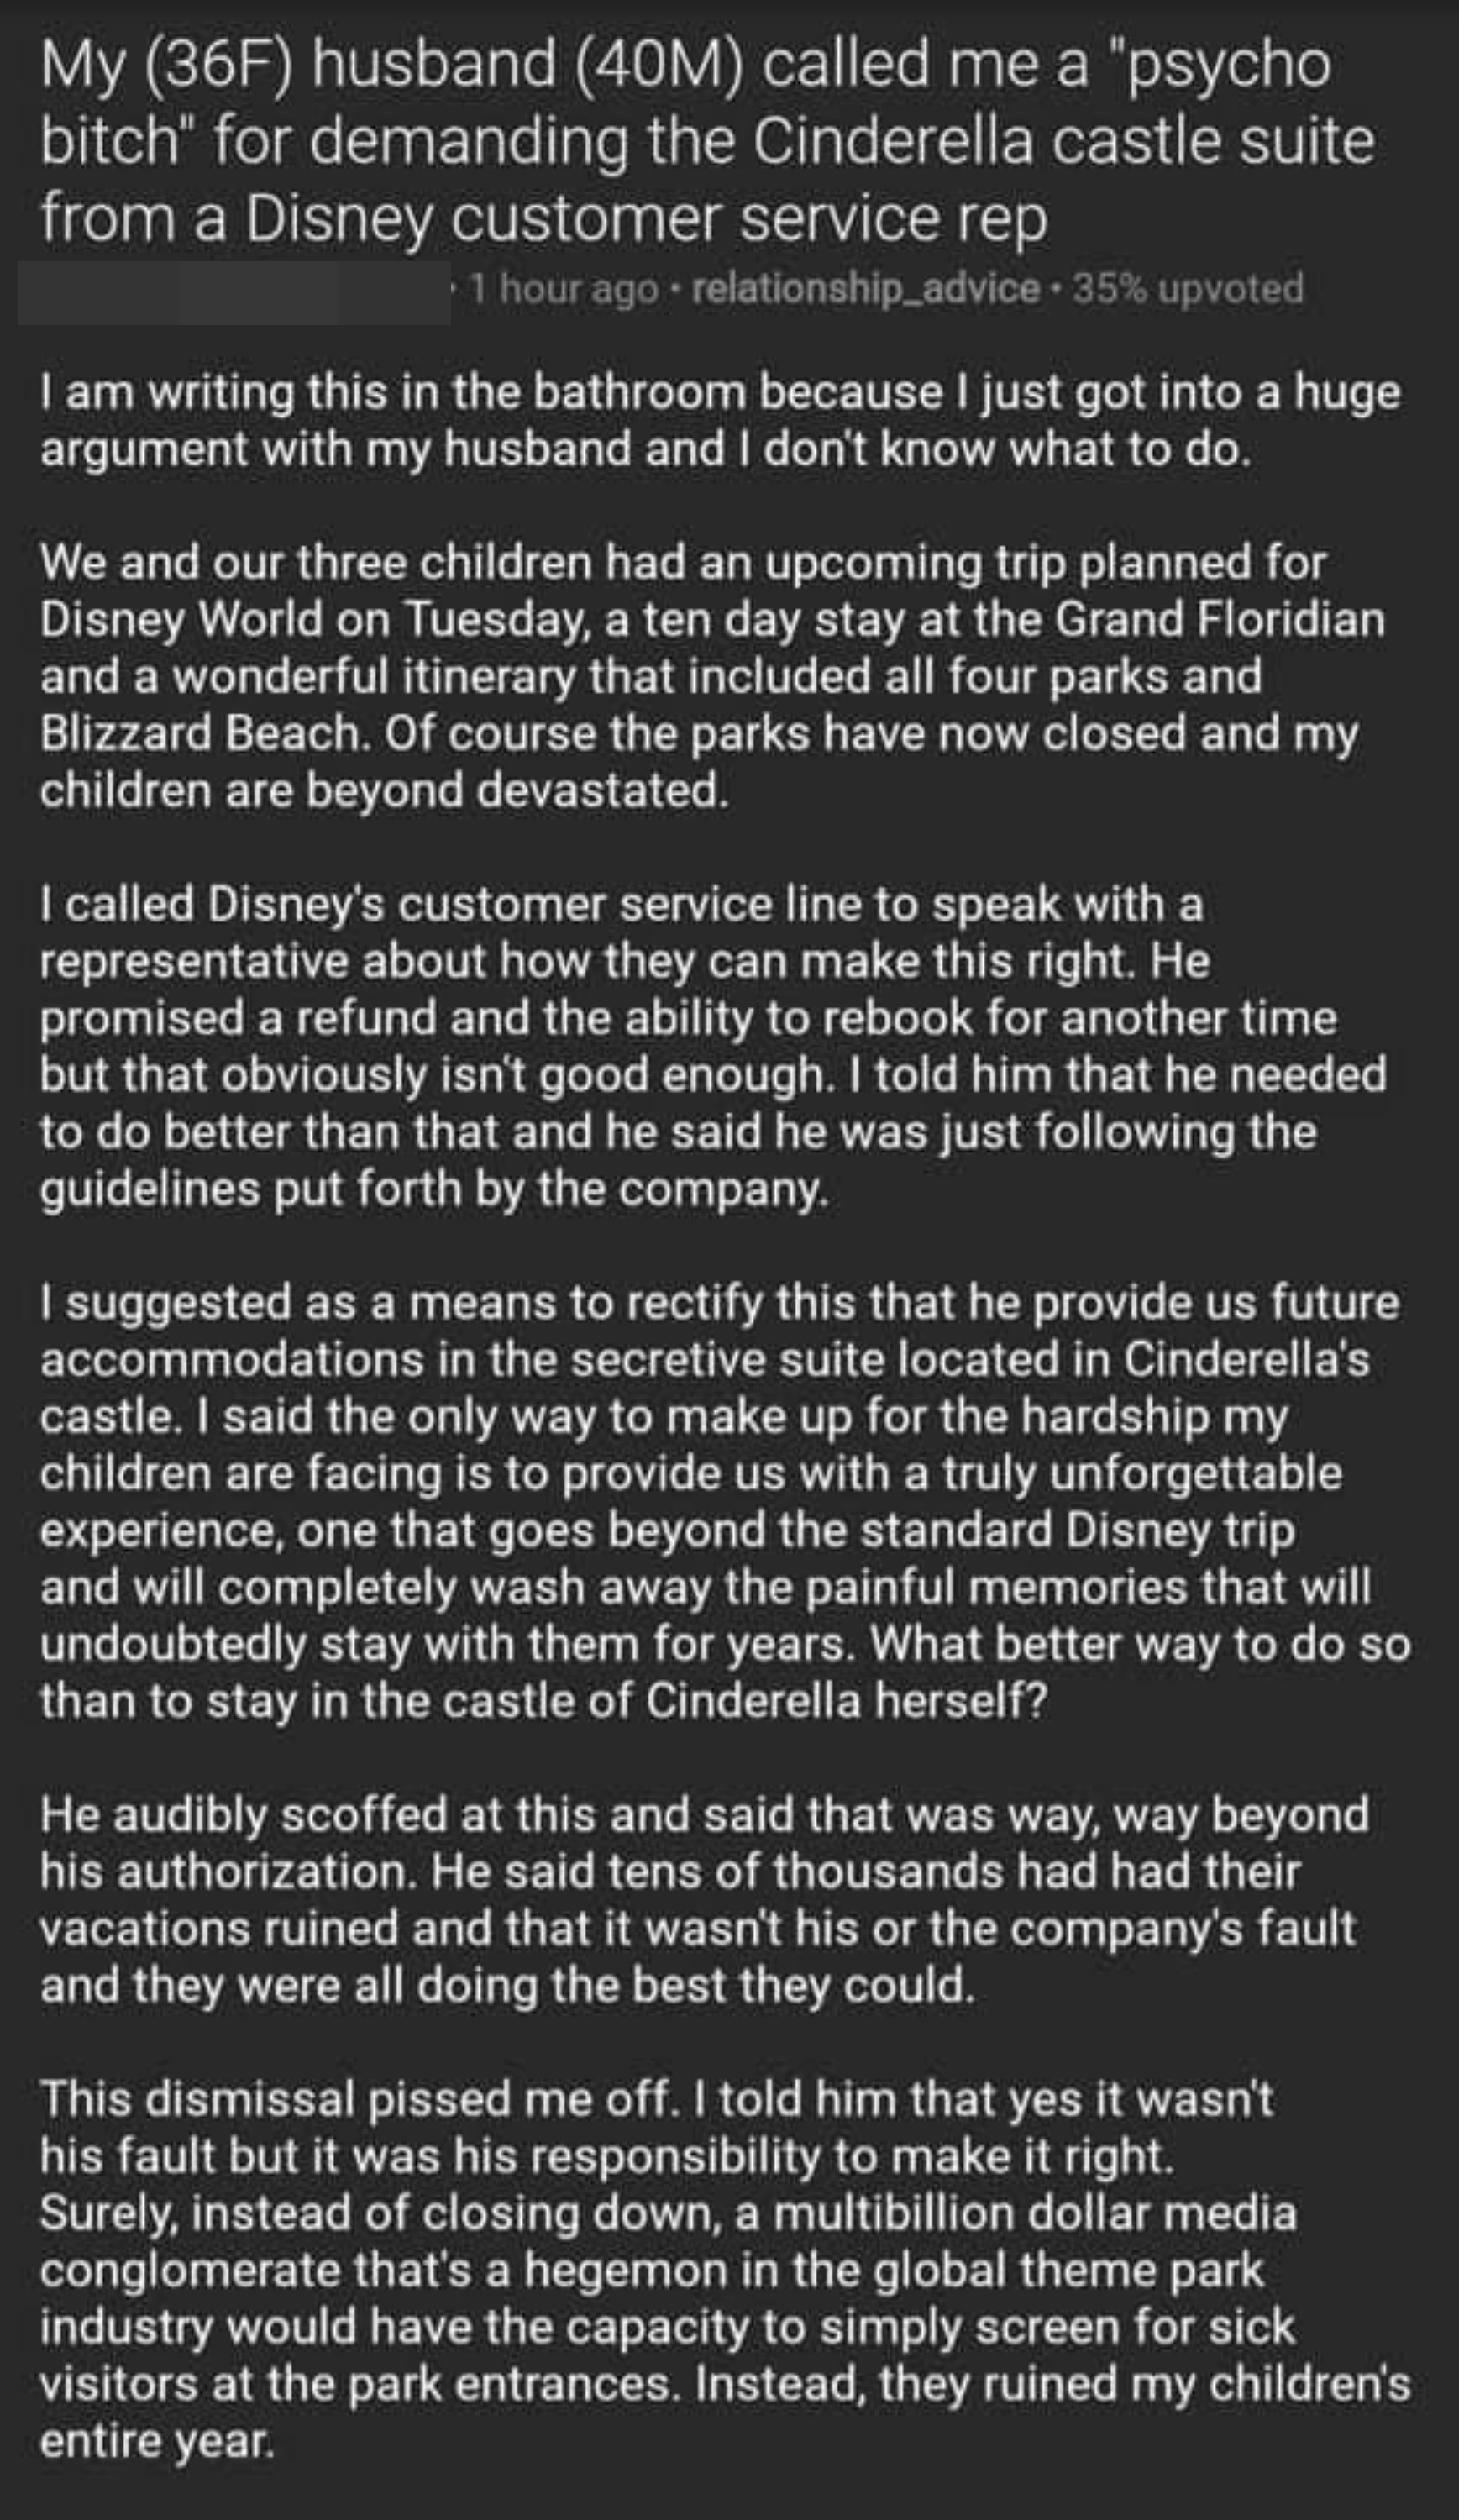 When the pandemic caused Disney to cancel a woman&#x27;s booking, she went off on the customer service rep and said a refund was not enough to make up for their hardship